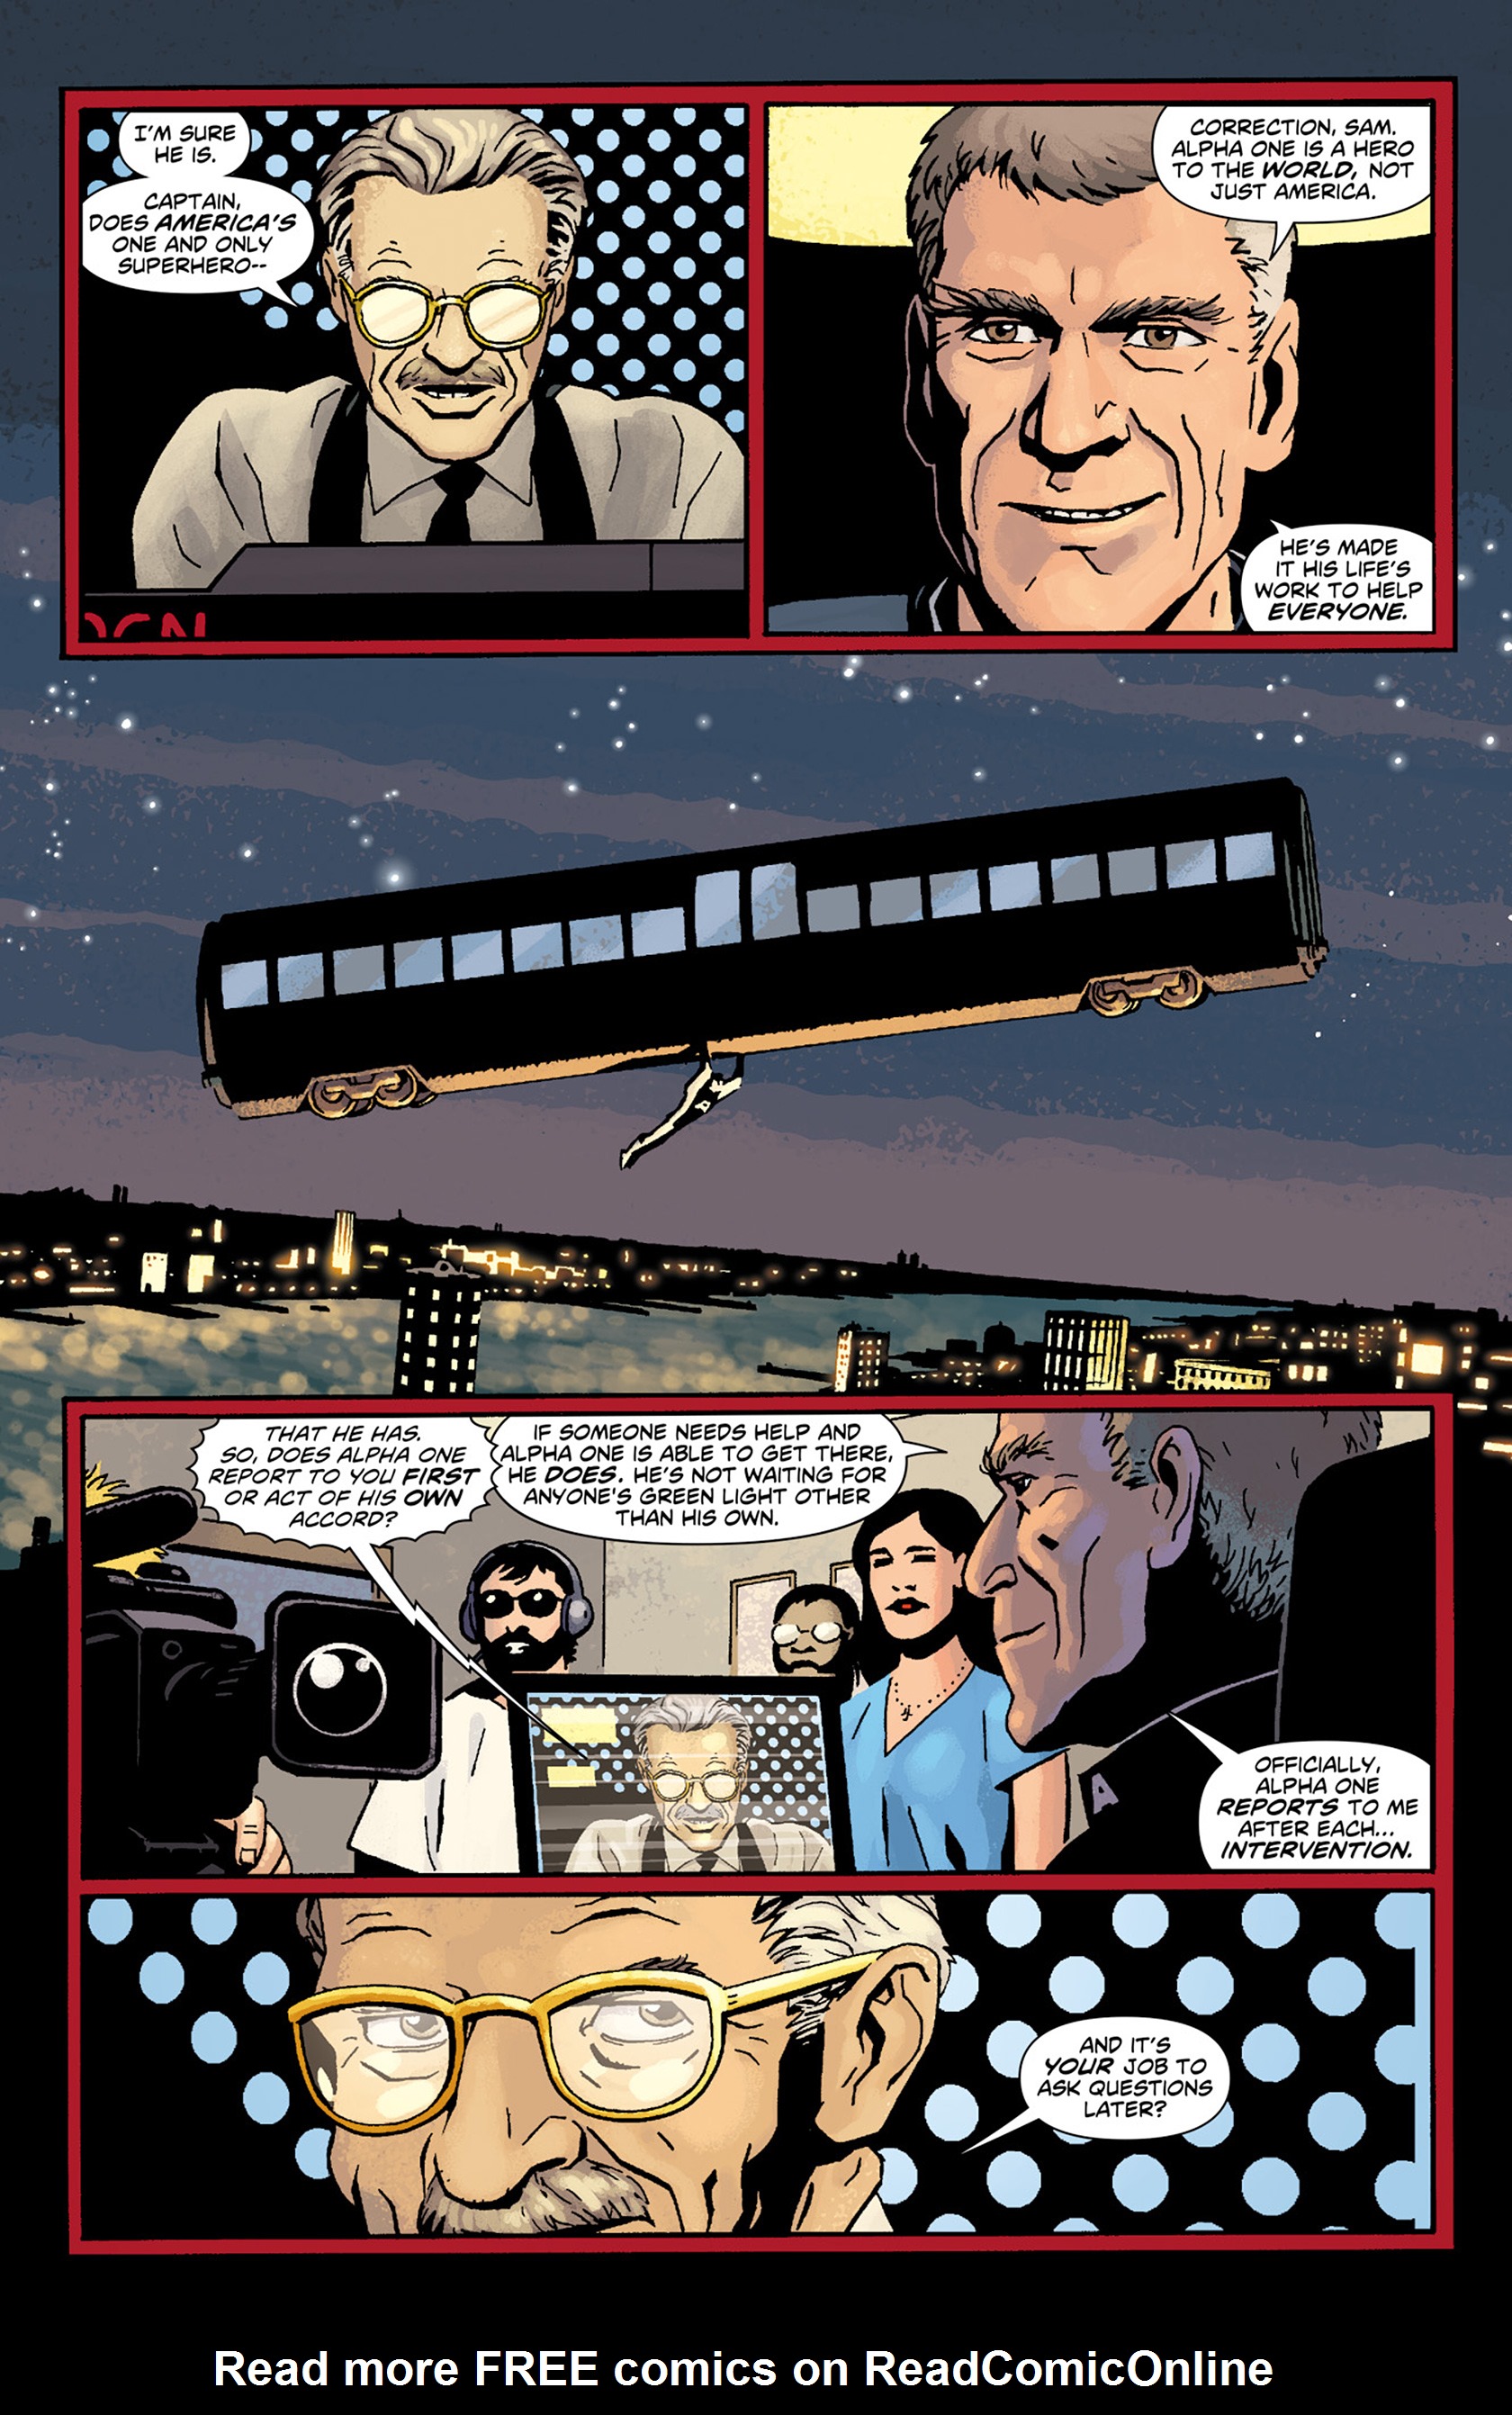 Read online The Mighty comic -  Issue # TPB - 13